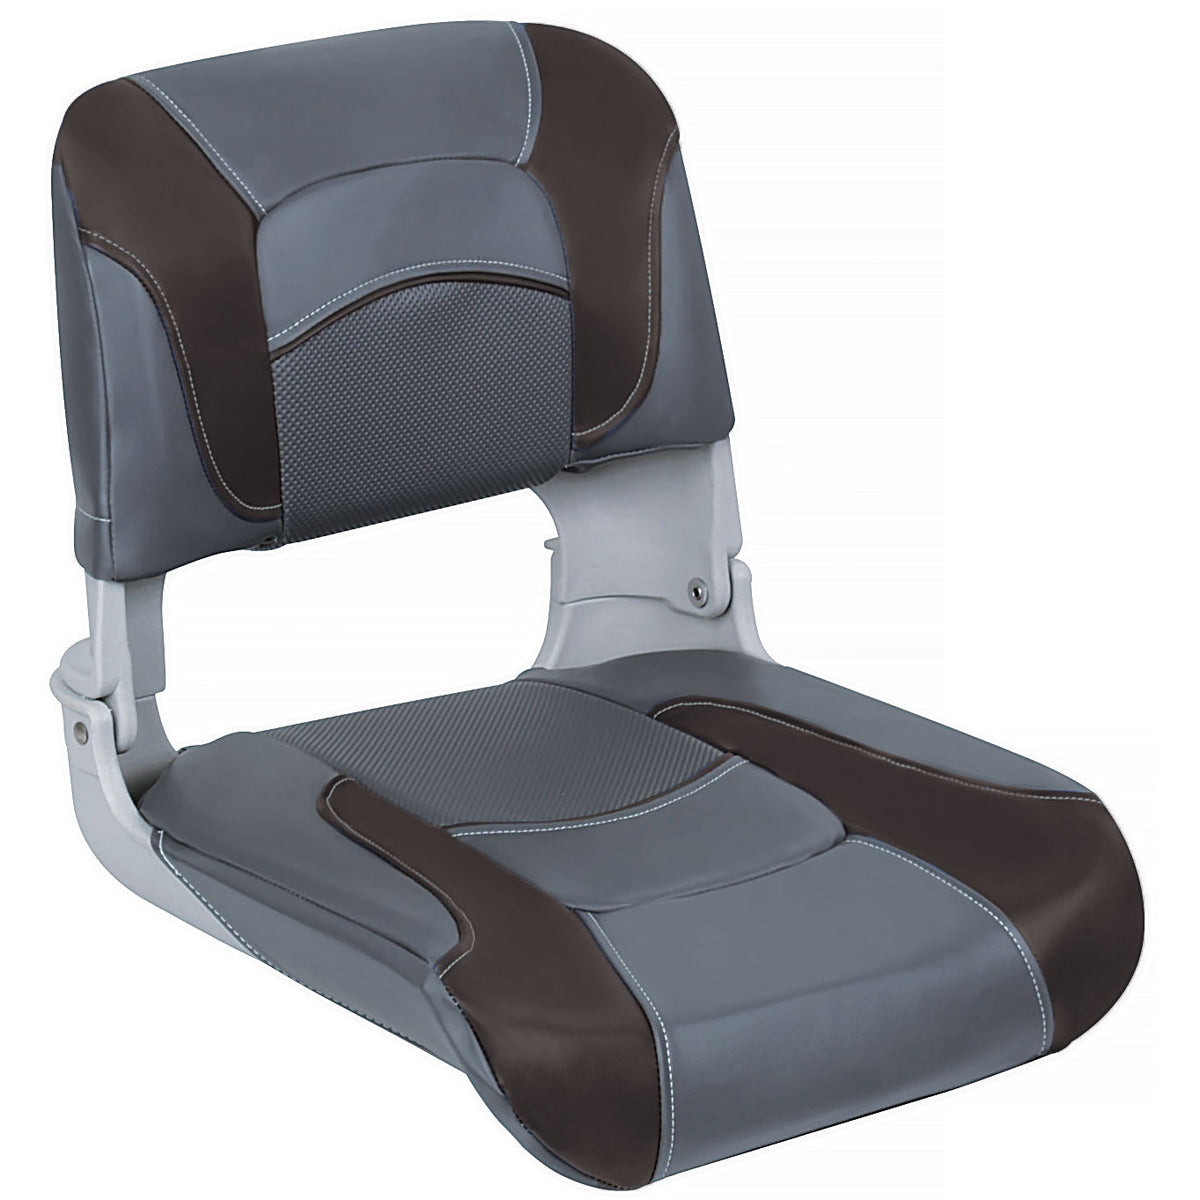  DeckMate 56 Bass Boat Seats (Gray w/Black Accent